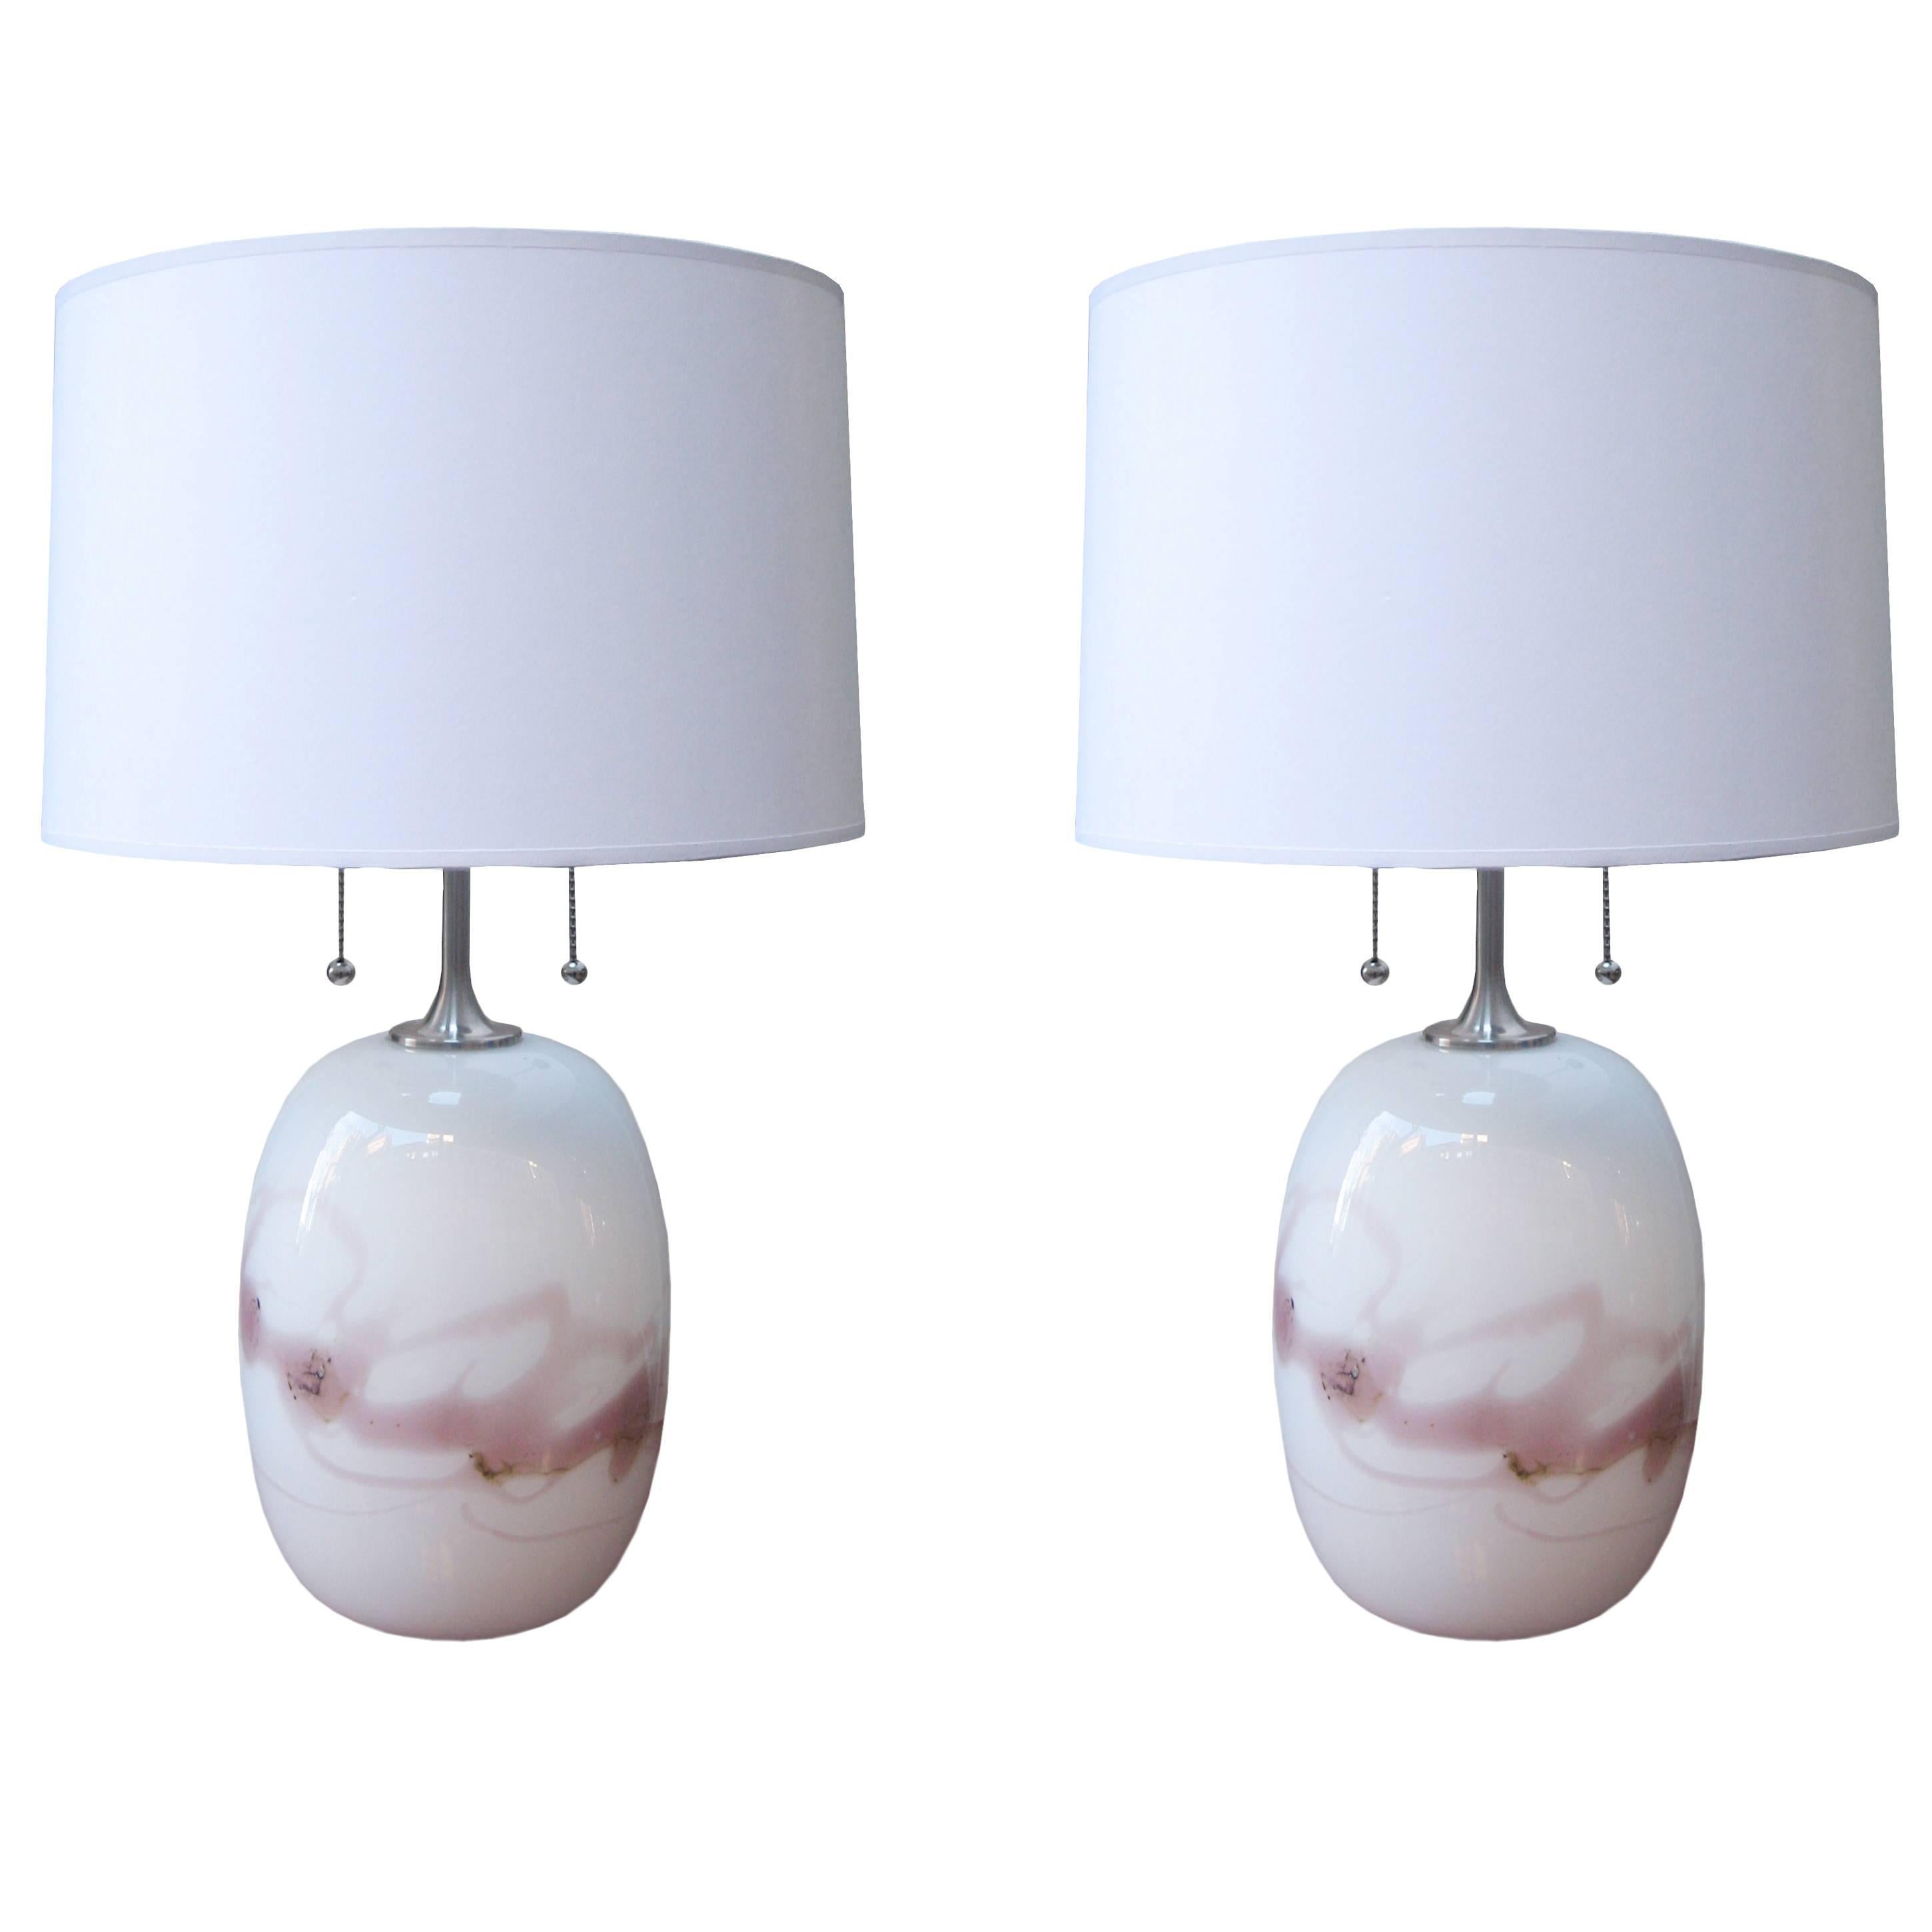 Pair of Holmgaard Modernist Glass Table Lamps